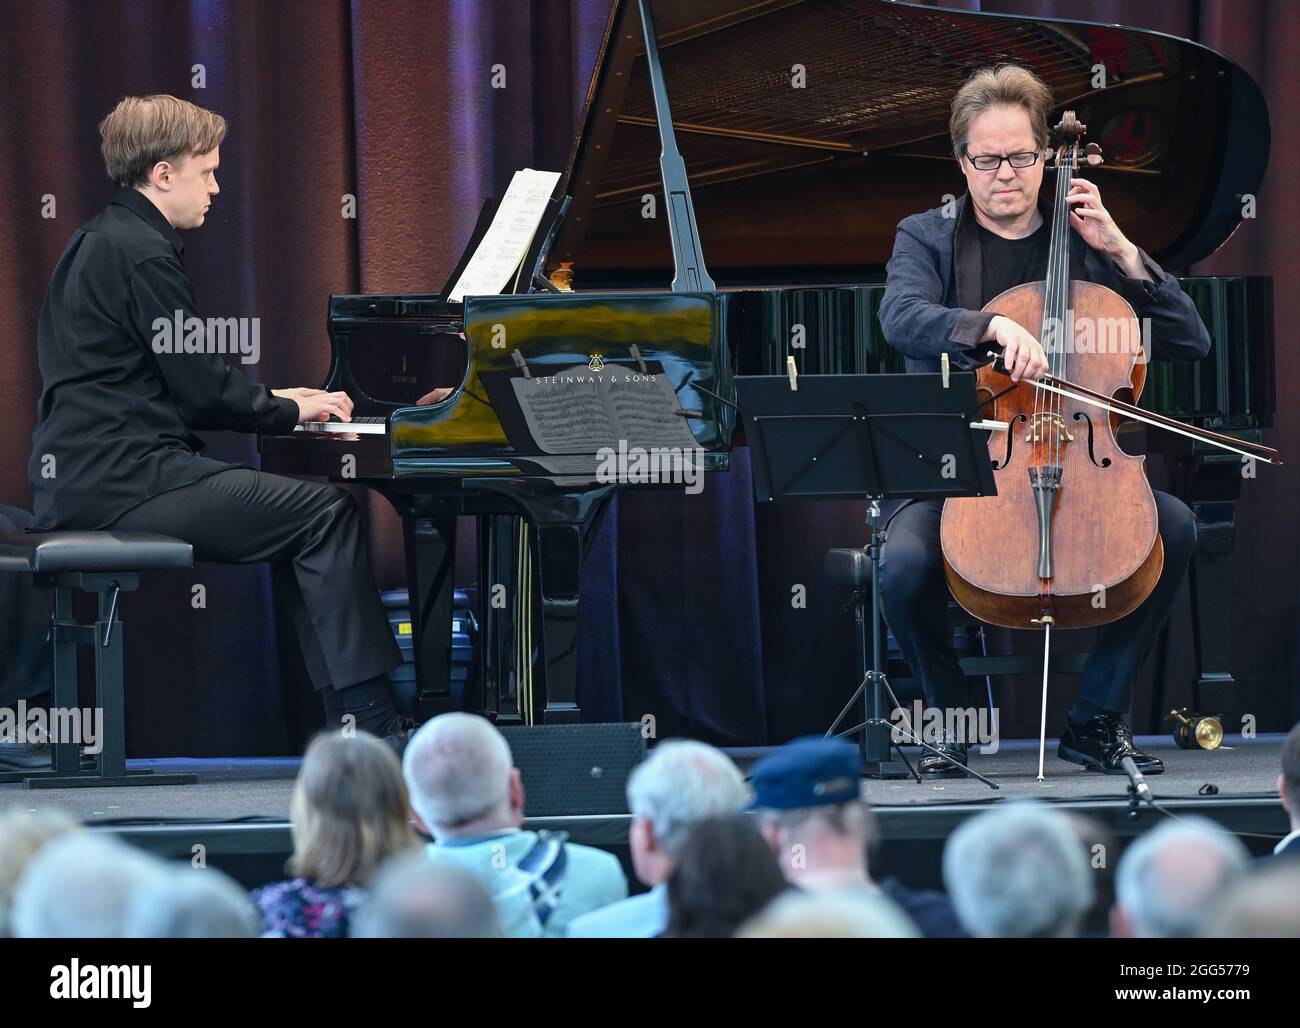 28 August 2021, Brandenburg, Neuhardenberg: Jan Vogler (r), musician on the cello, plays together with Antti Siirala on the grand piano on stage at the end of the course "Meisterschüler-Meister" for the summer program at Schloss Neuhardenberg. For the seventh time, the Stiftung Schloss Neuhardenberg and cellist Jan Vogler invited young musicians from Europe to a one-week chamber music workshop at Schloss Neuhardenberg. The programme of the open-air event series "Into the Open Air!" will run until 05.09.2021. Many different concerts, readings and talks will take place under the large tent roof Stock Photo